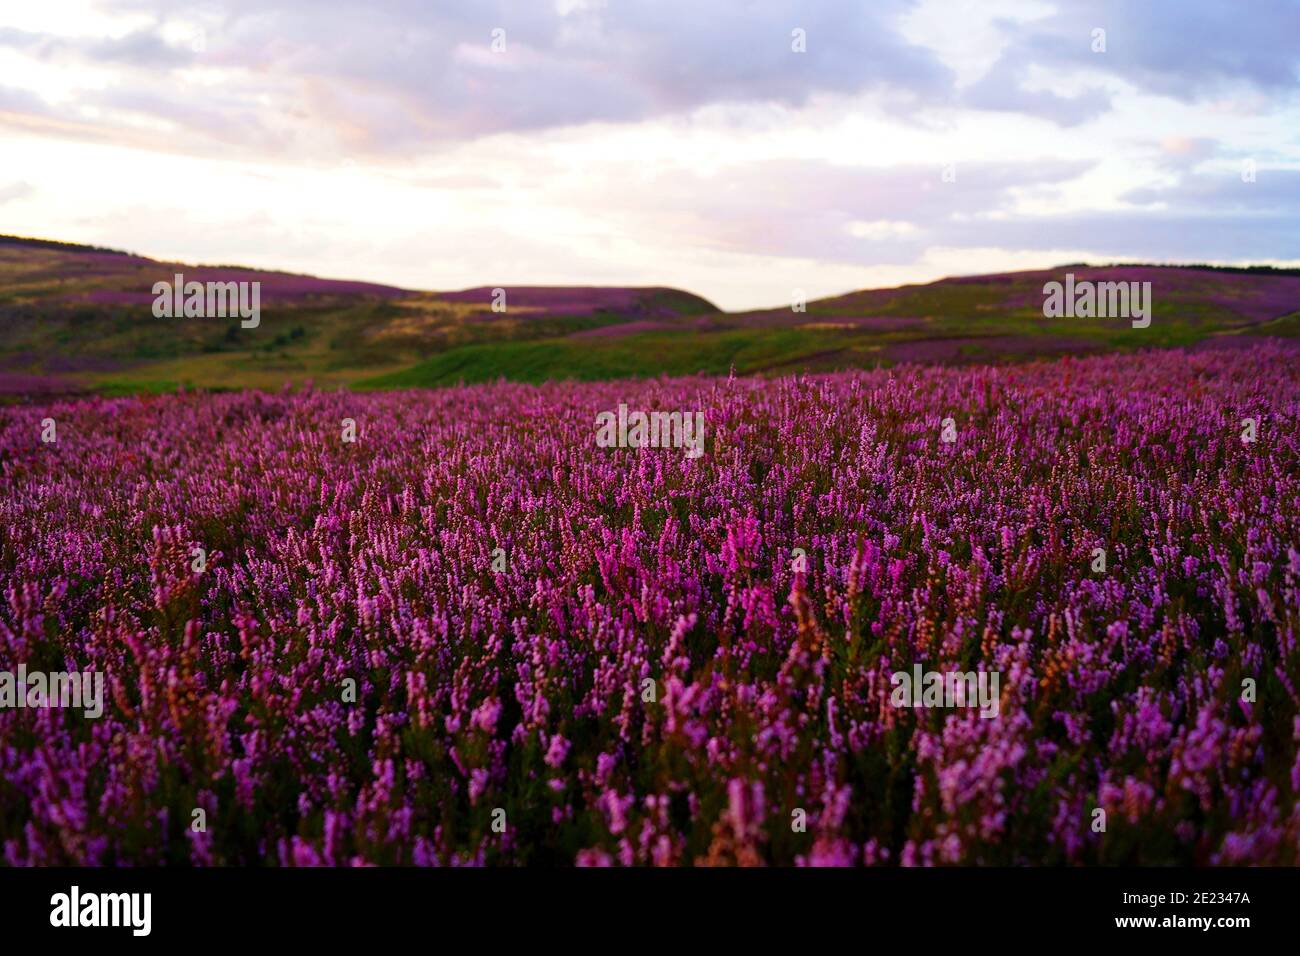 Purple moorlands in the North York Moors National Park in North Yorkshire, England. Stock Photo